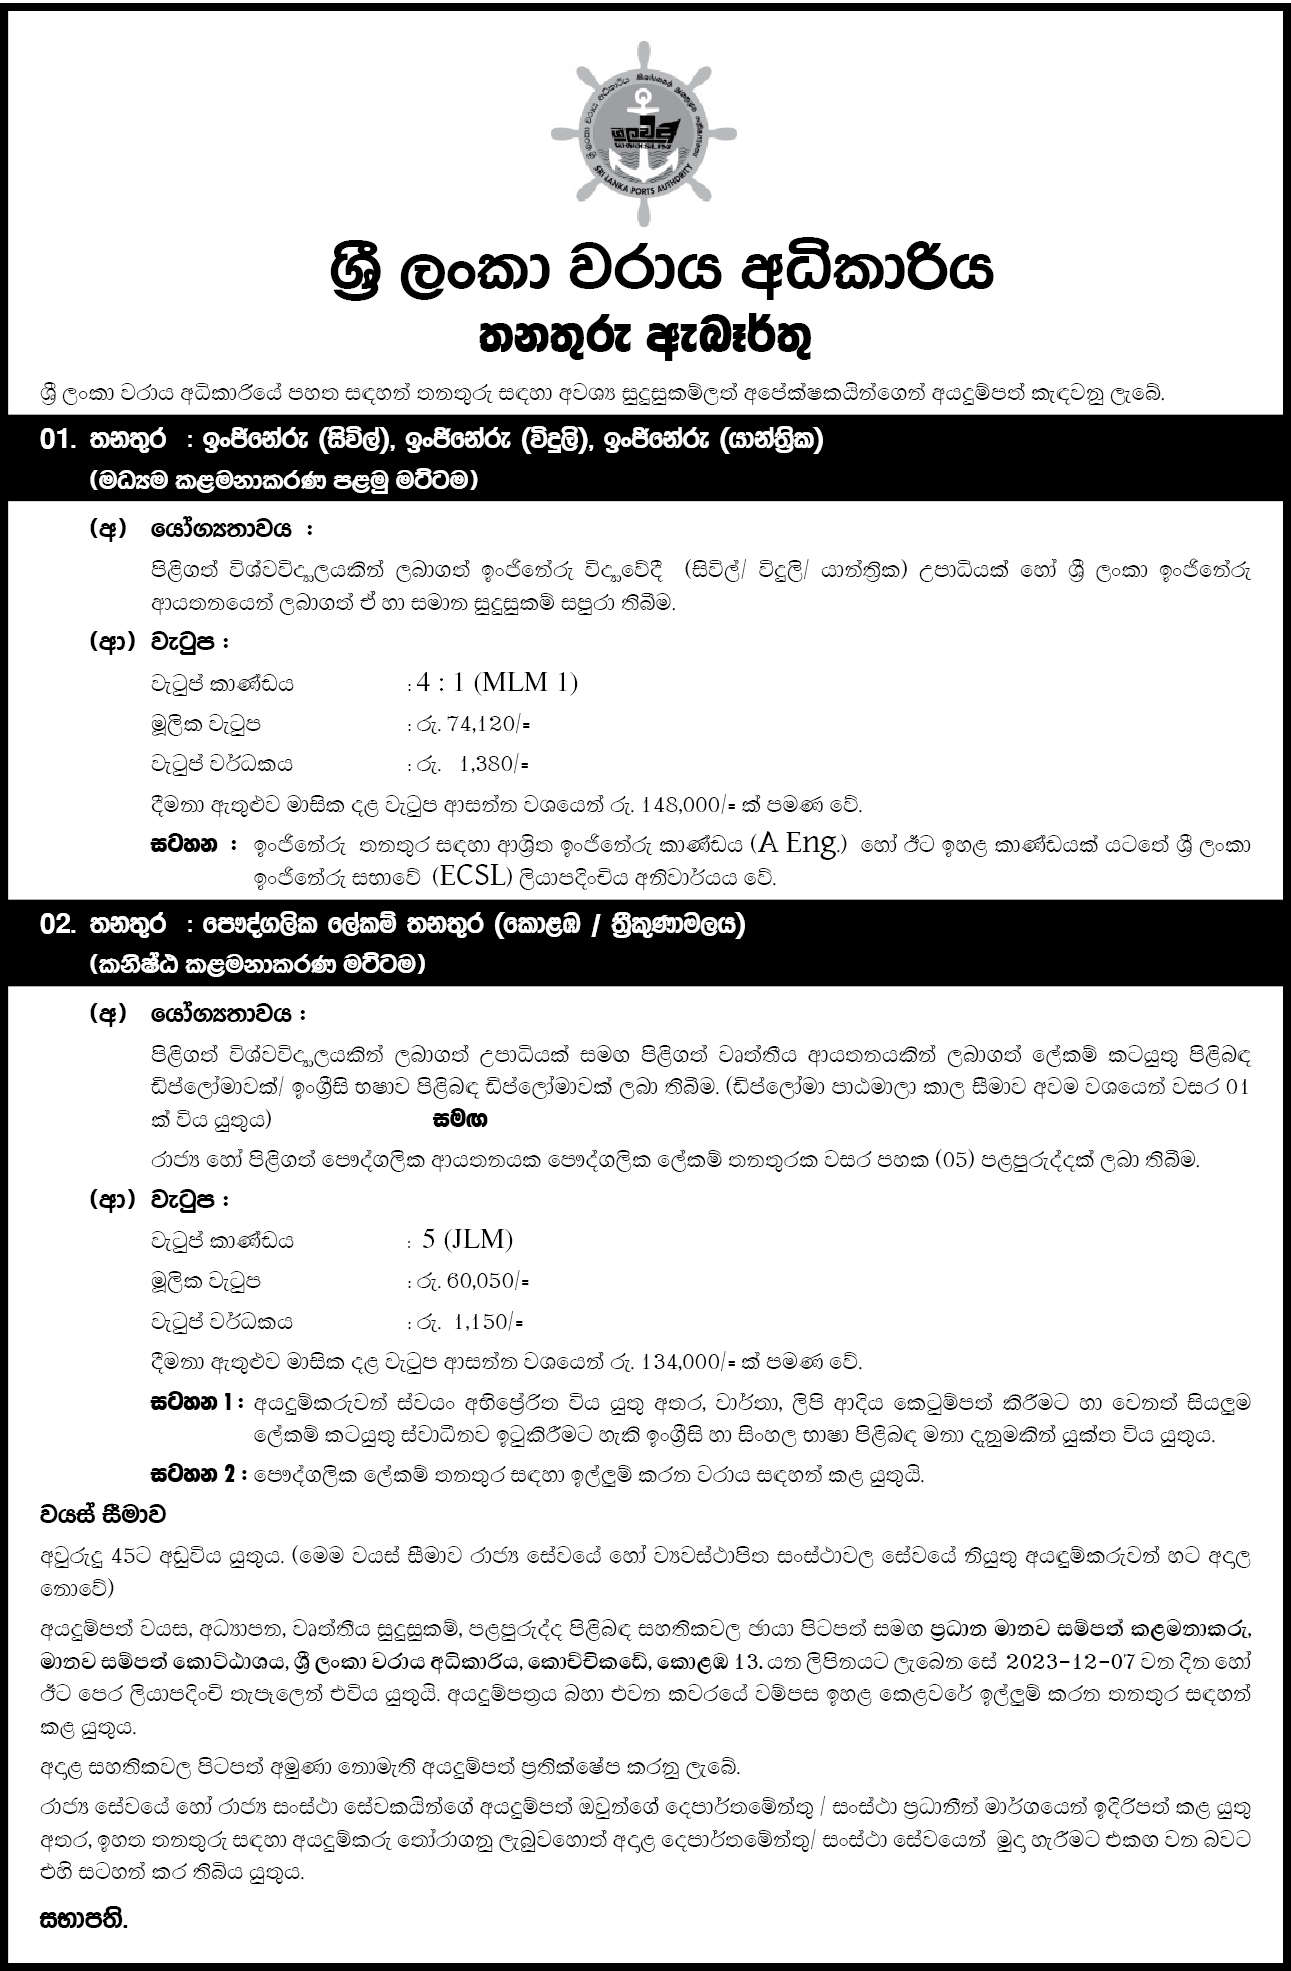 Engineer Post - Civil, Electrical, Mechanical, Private Secretary Post